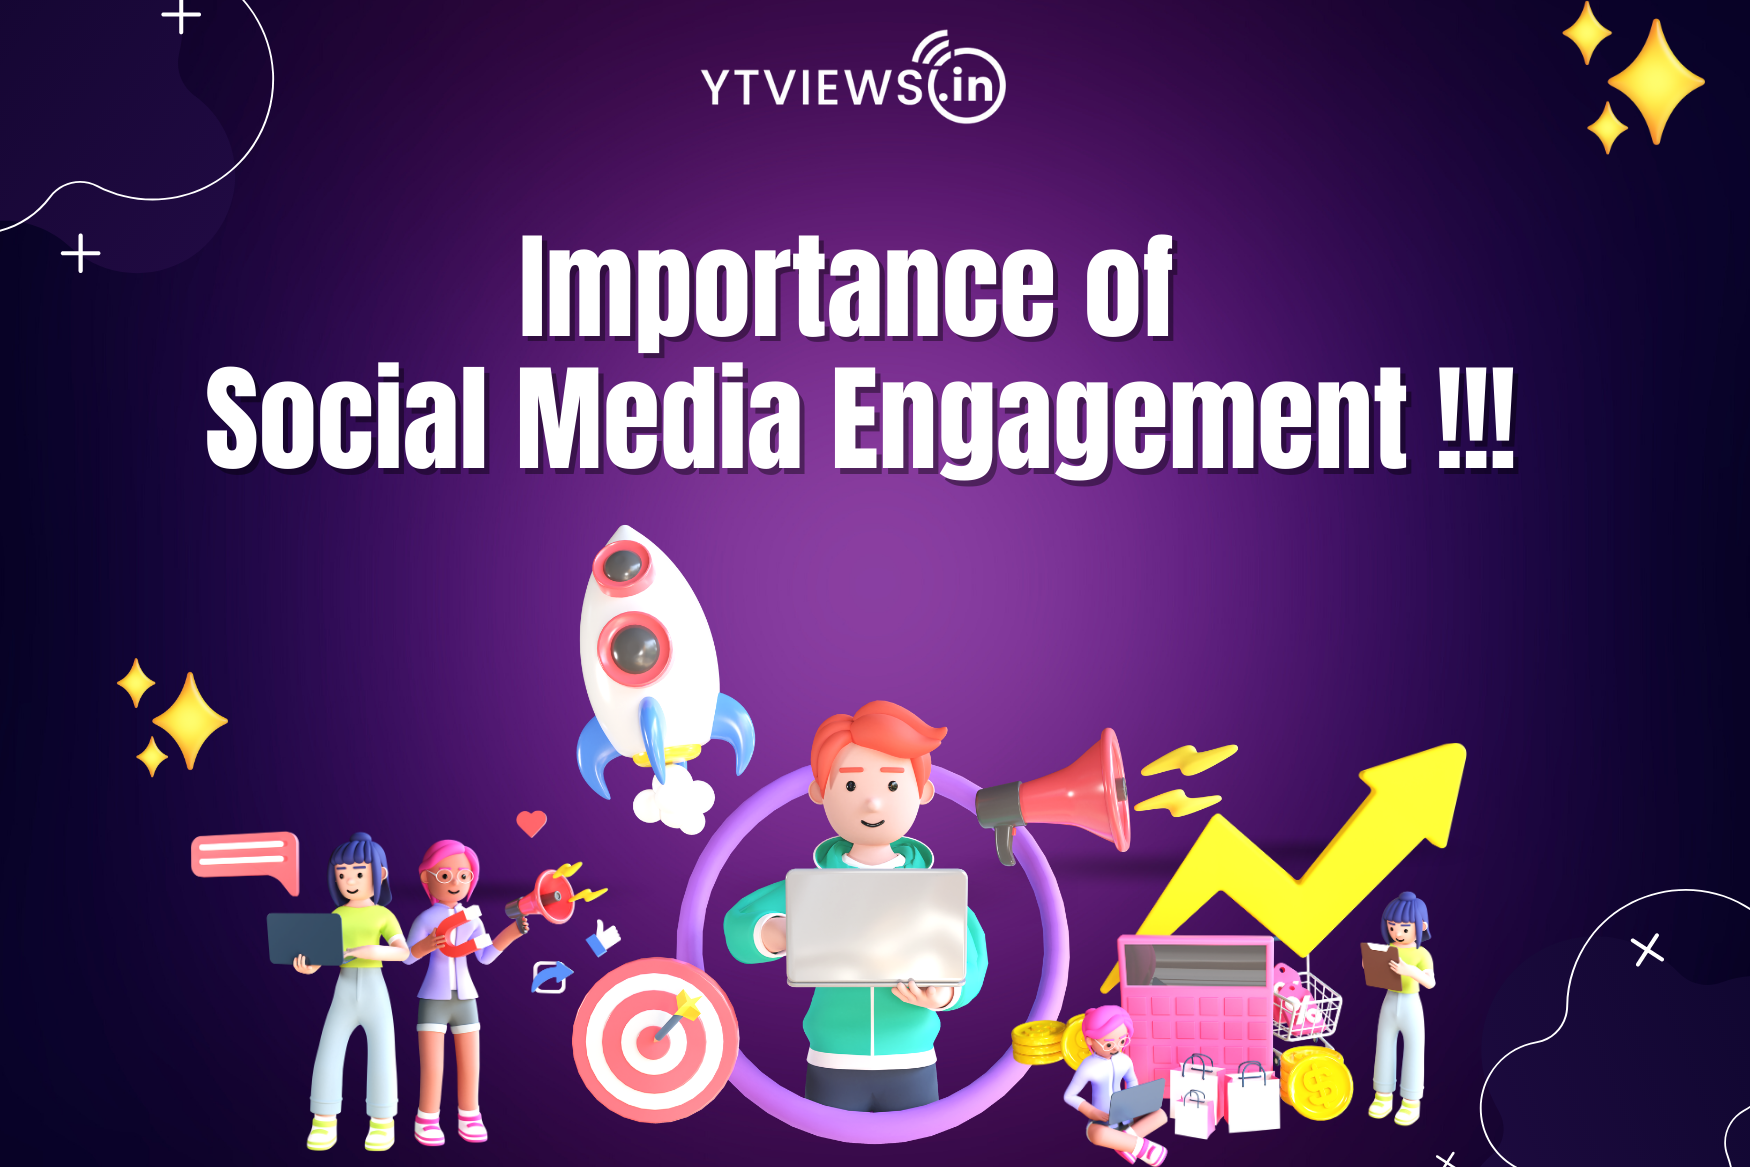 The importance of social media engagement in developing customer insights and market research